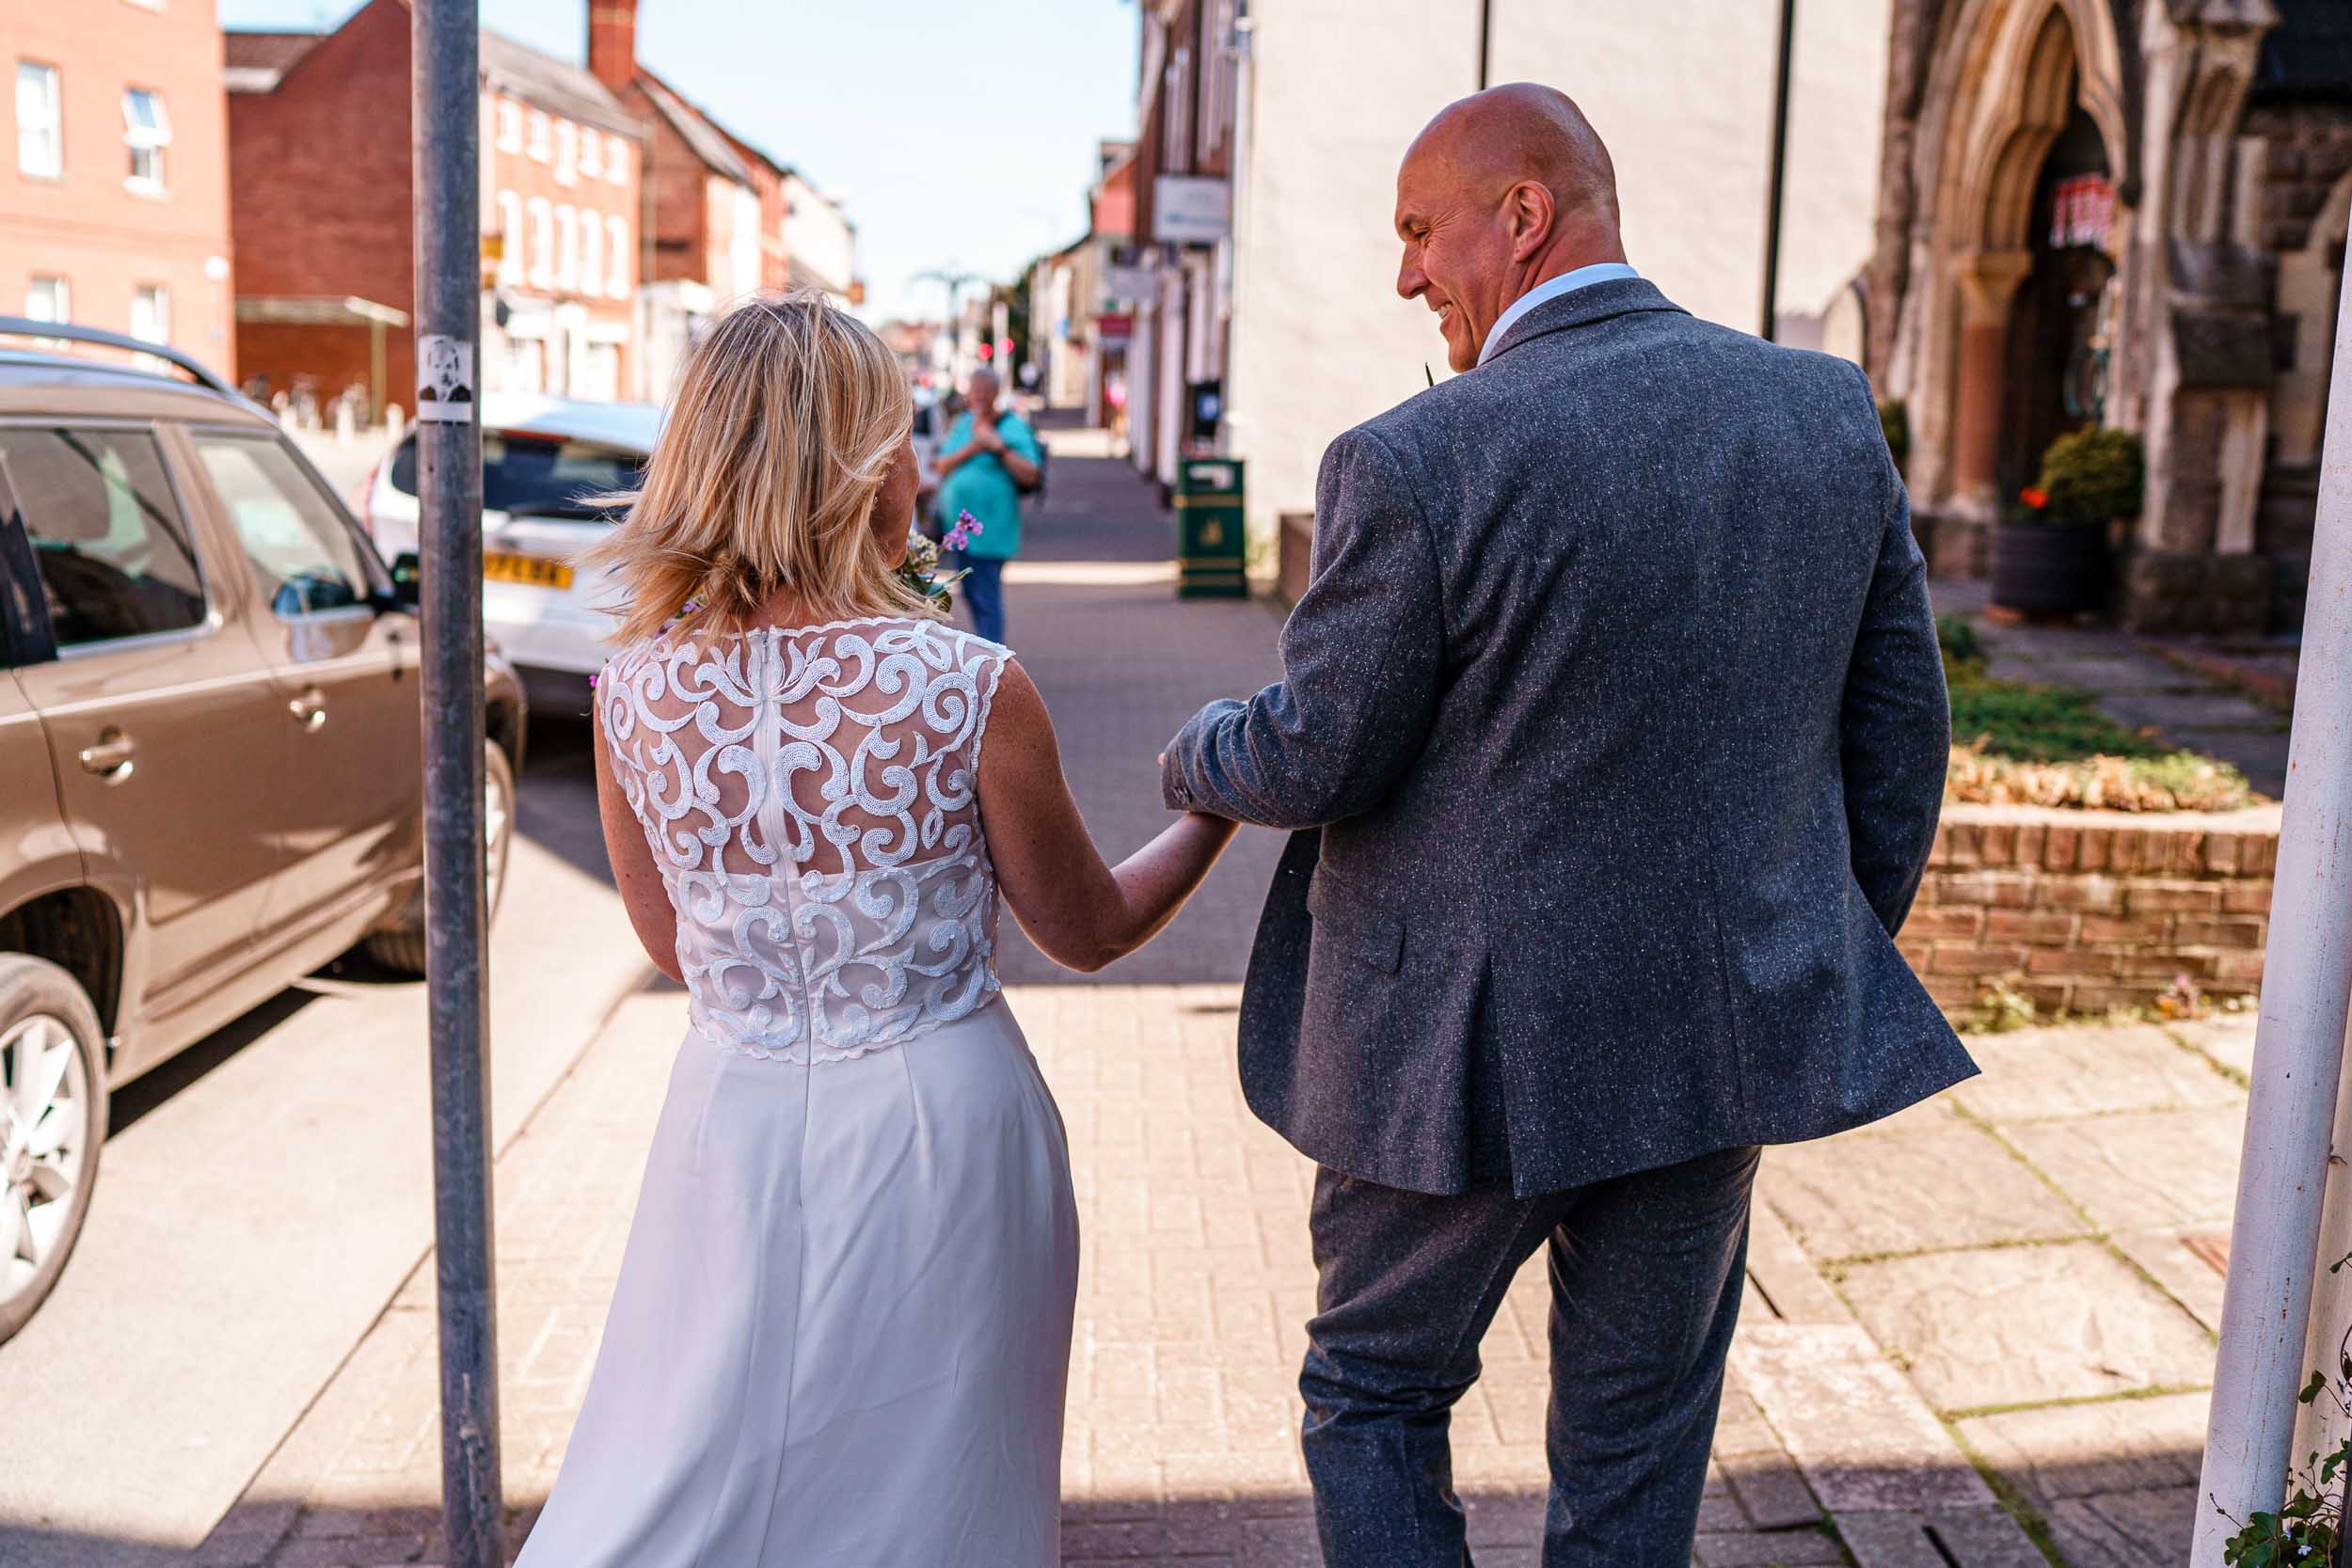 Hereford Elopement Photography - A wedding in Herefordshire